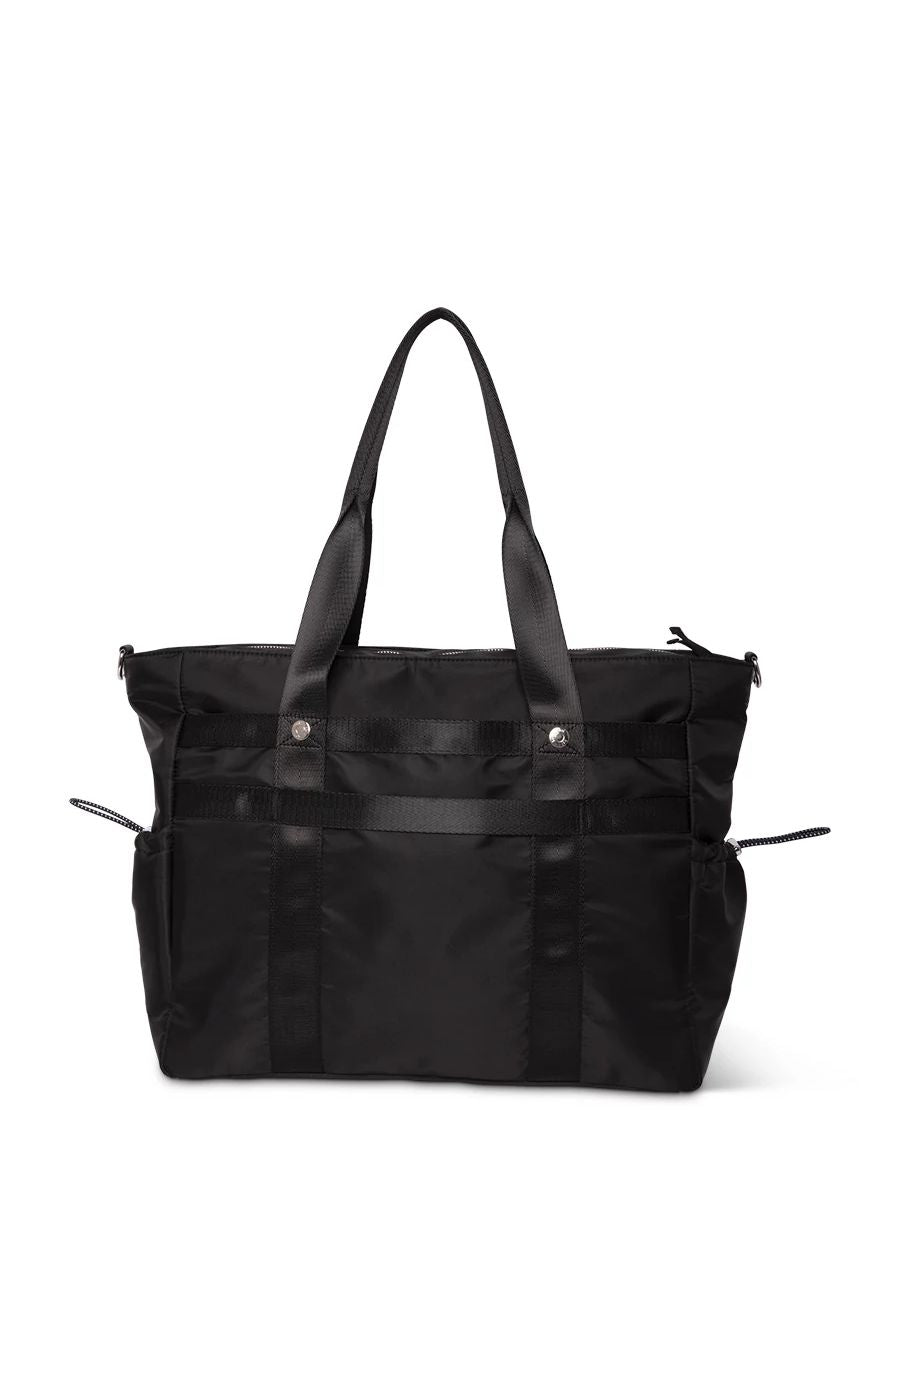 All You Can Fit Tote Black